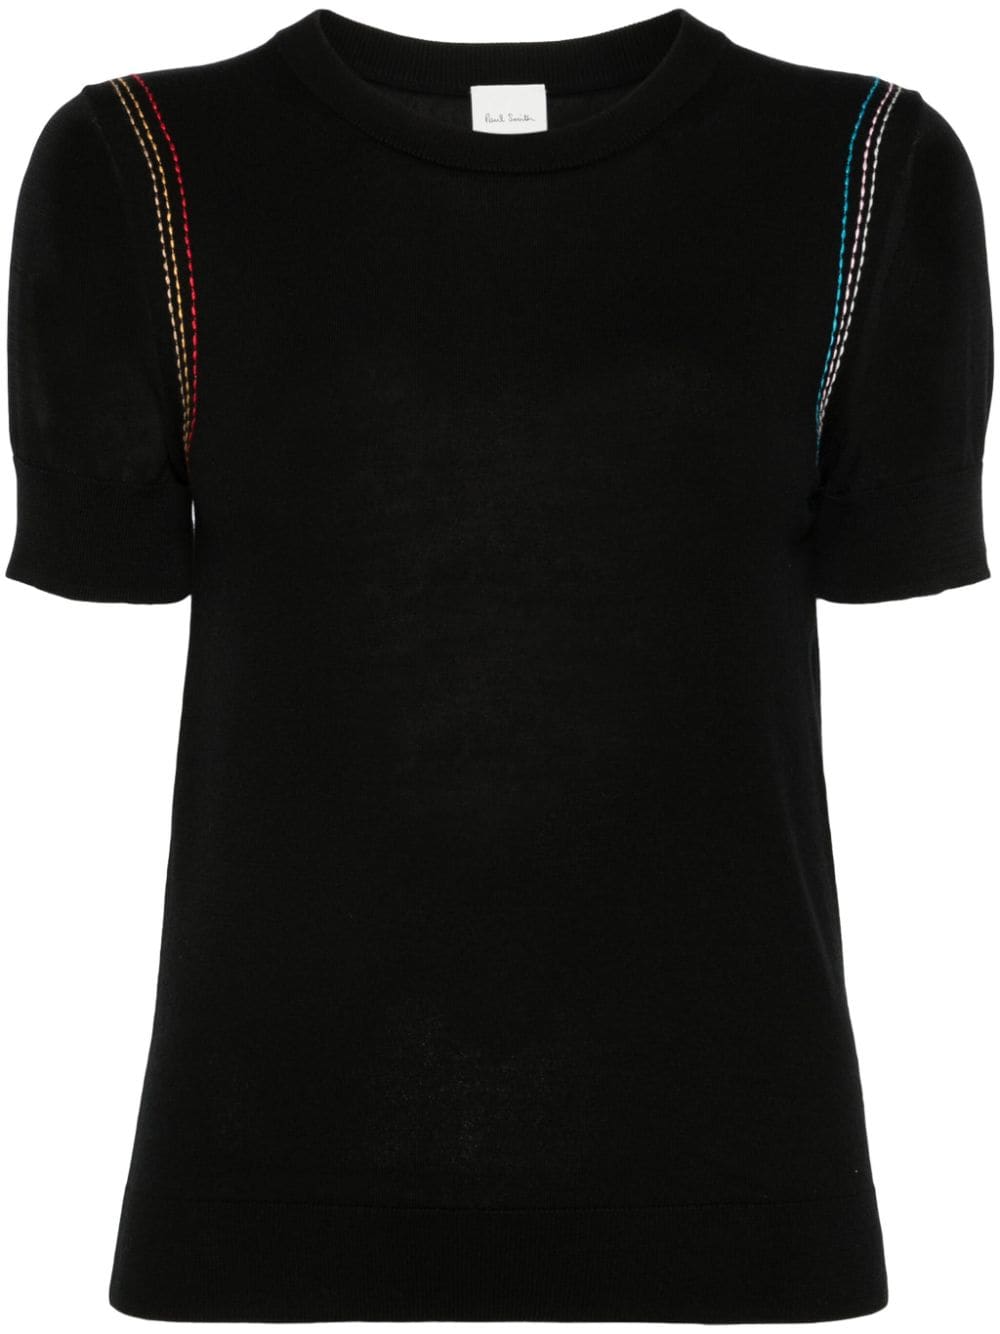 Paul Smith contrast-stitched knitted top - Black von Paul Smith